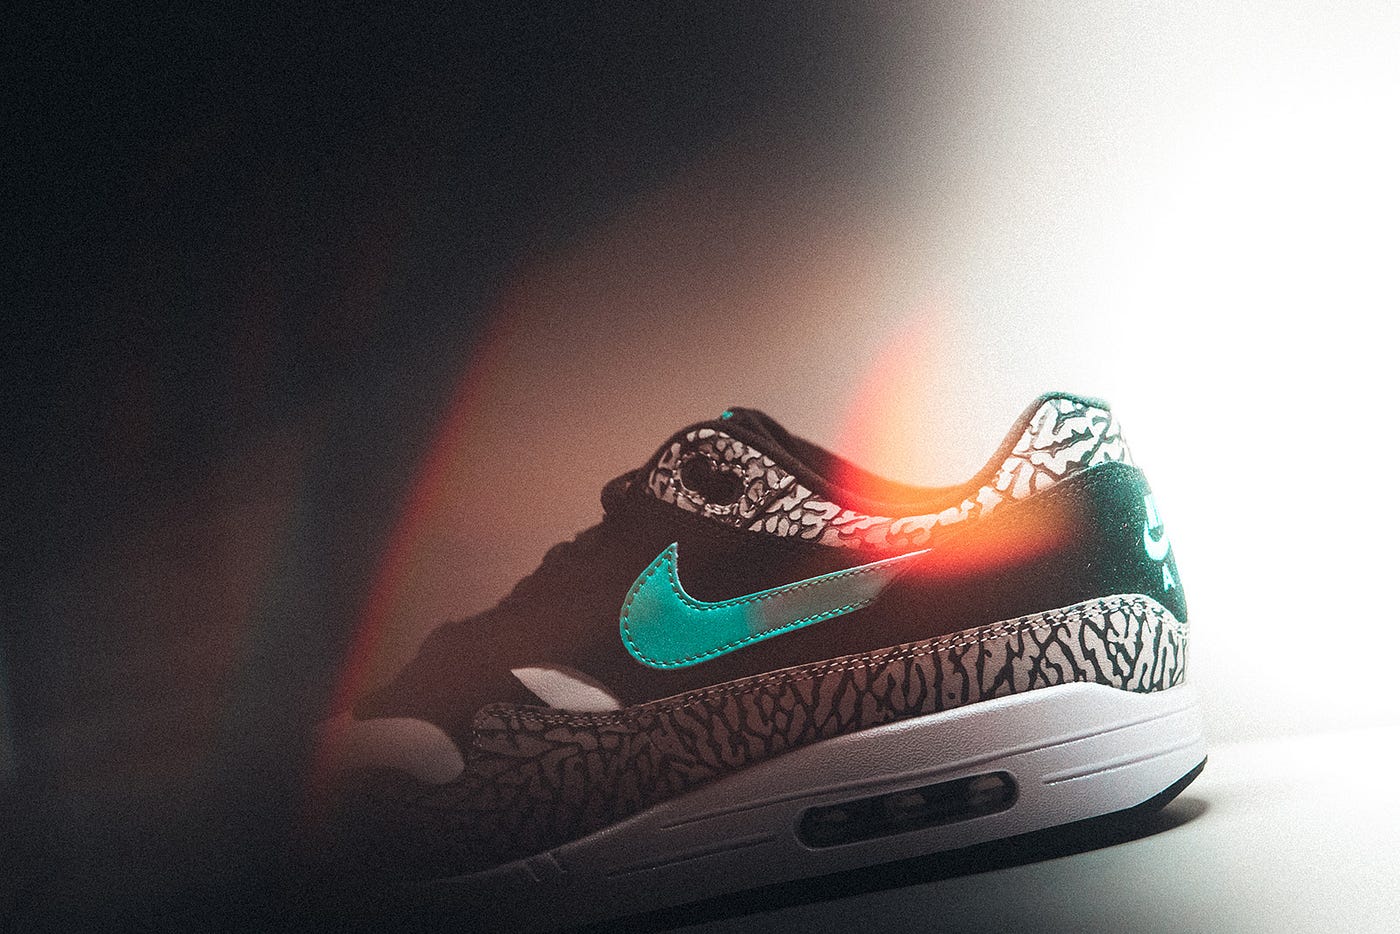 A Brief History of the Nike Air Max 1 - Sneaker Freaker